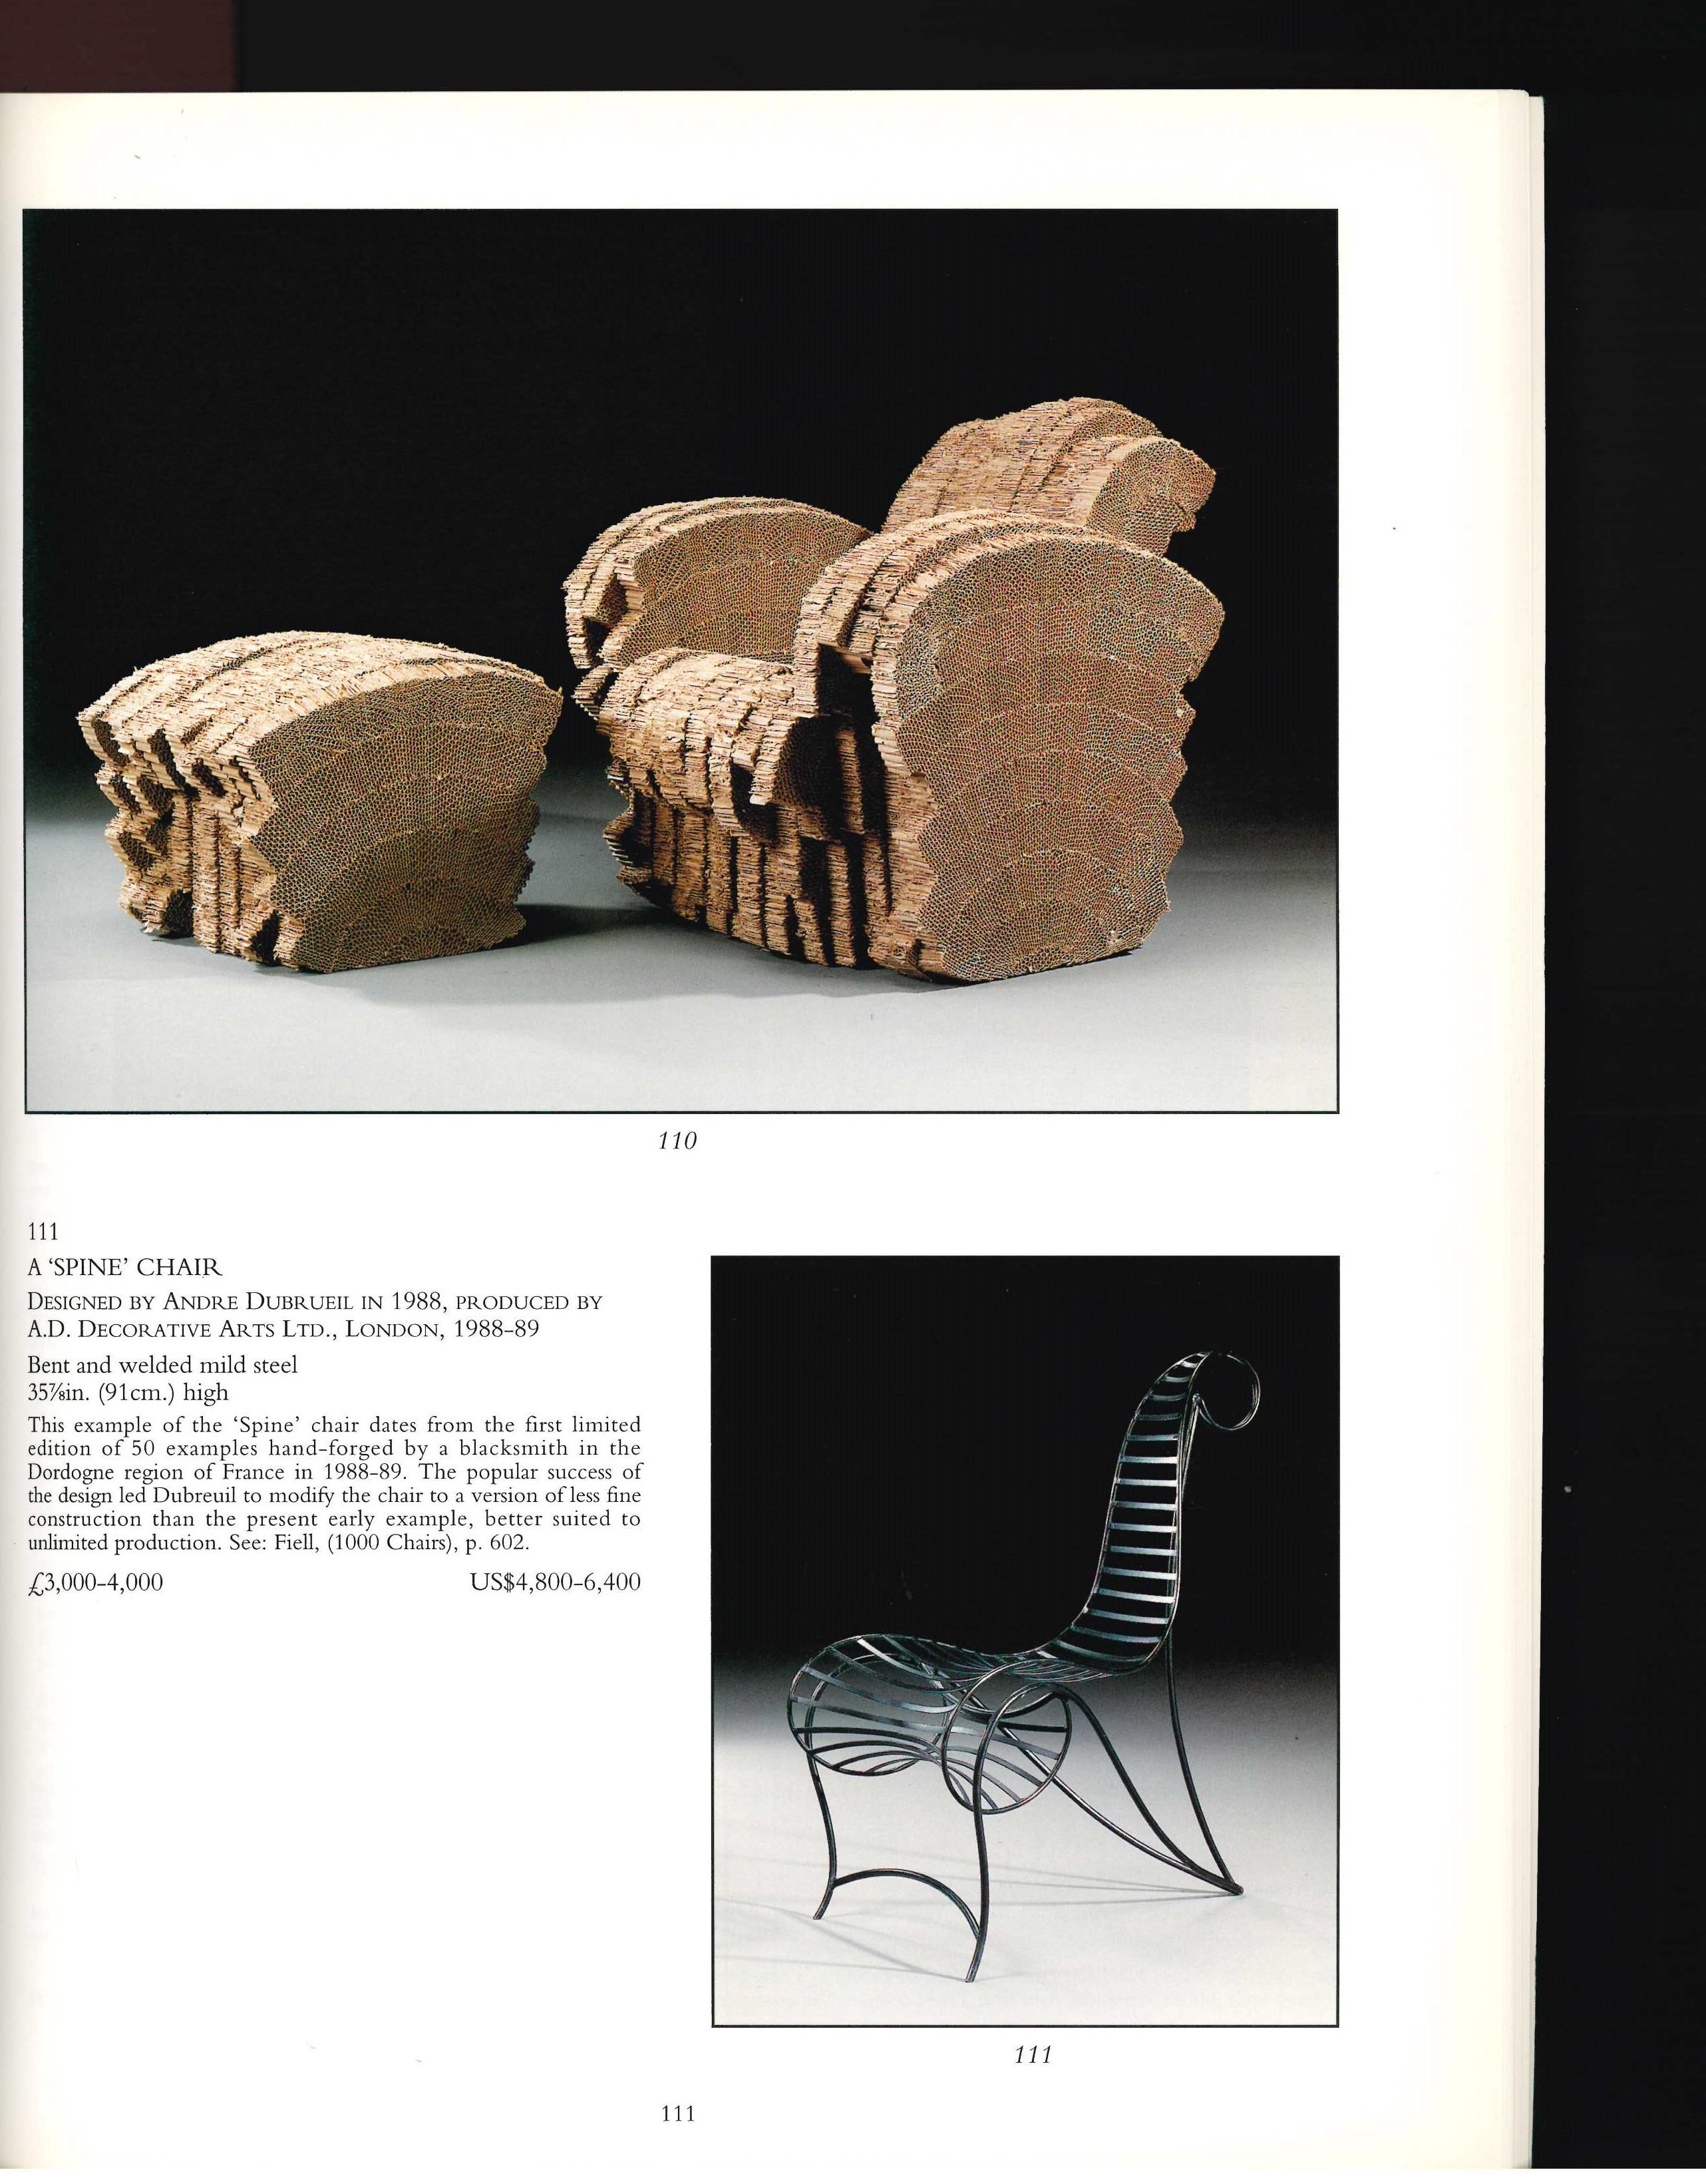 THE CHAIR, Christie's Auction Catalogue 29 October 1997 5